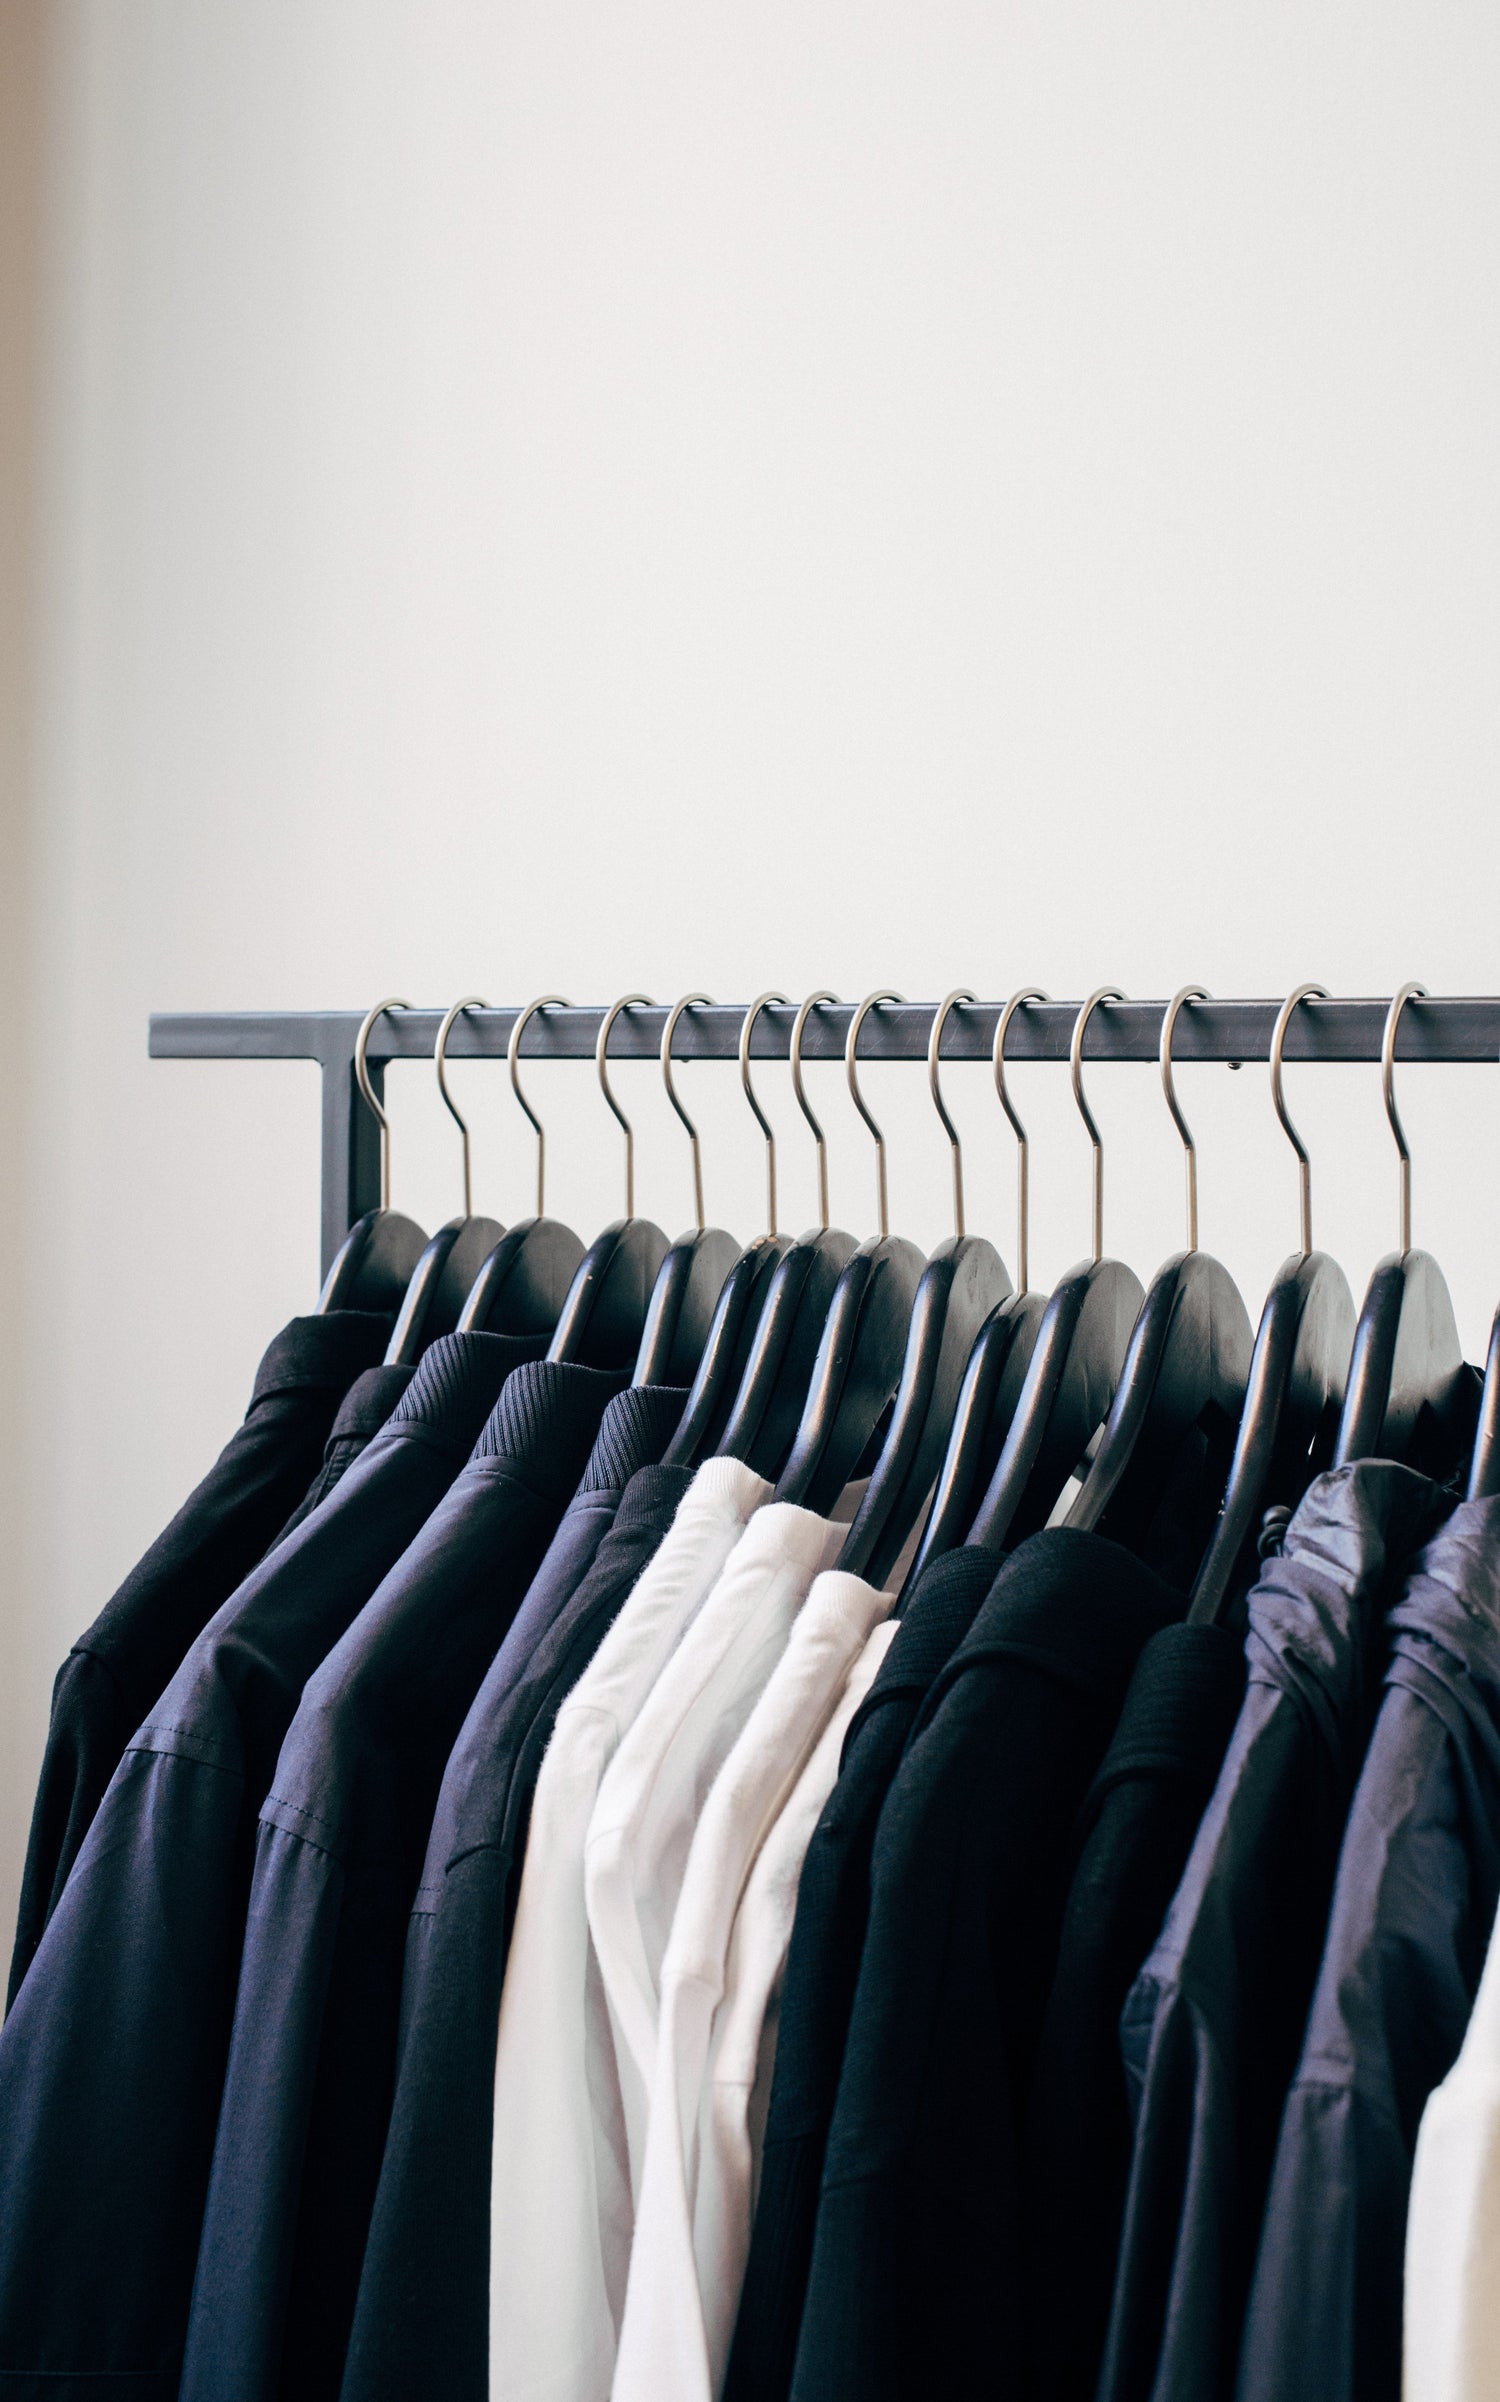 Collection of Designer Clothes on Rack